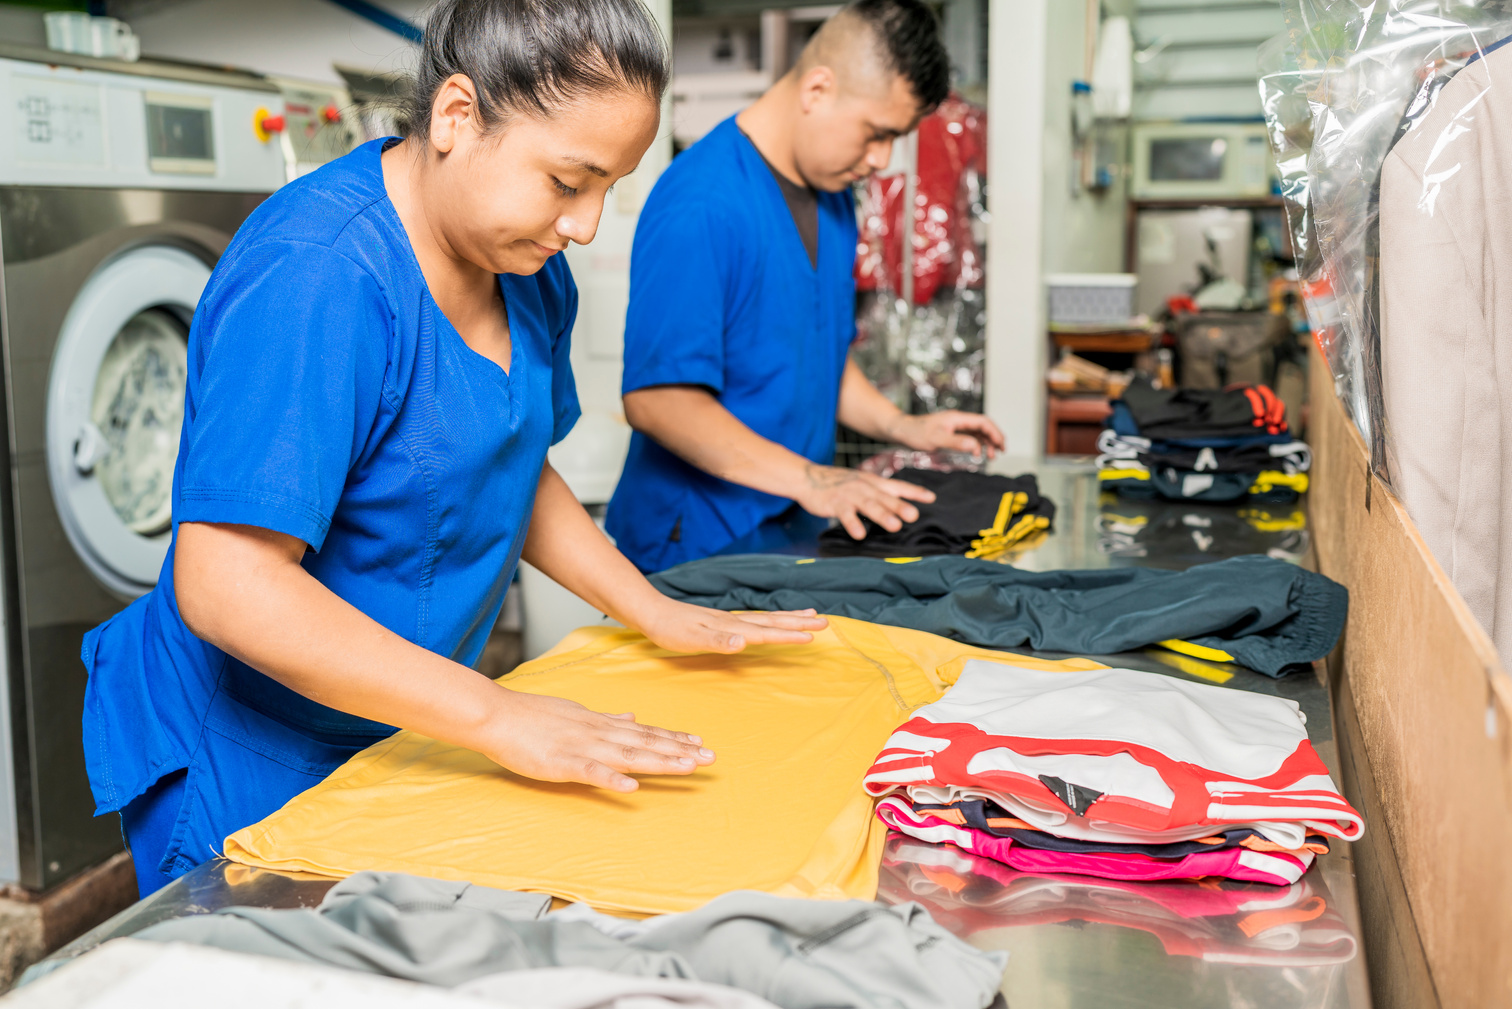 Employees in Uniform Folding Clothes in a Laundry Service